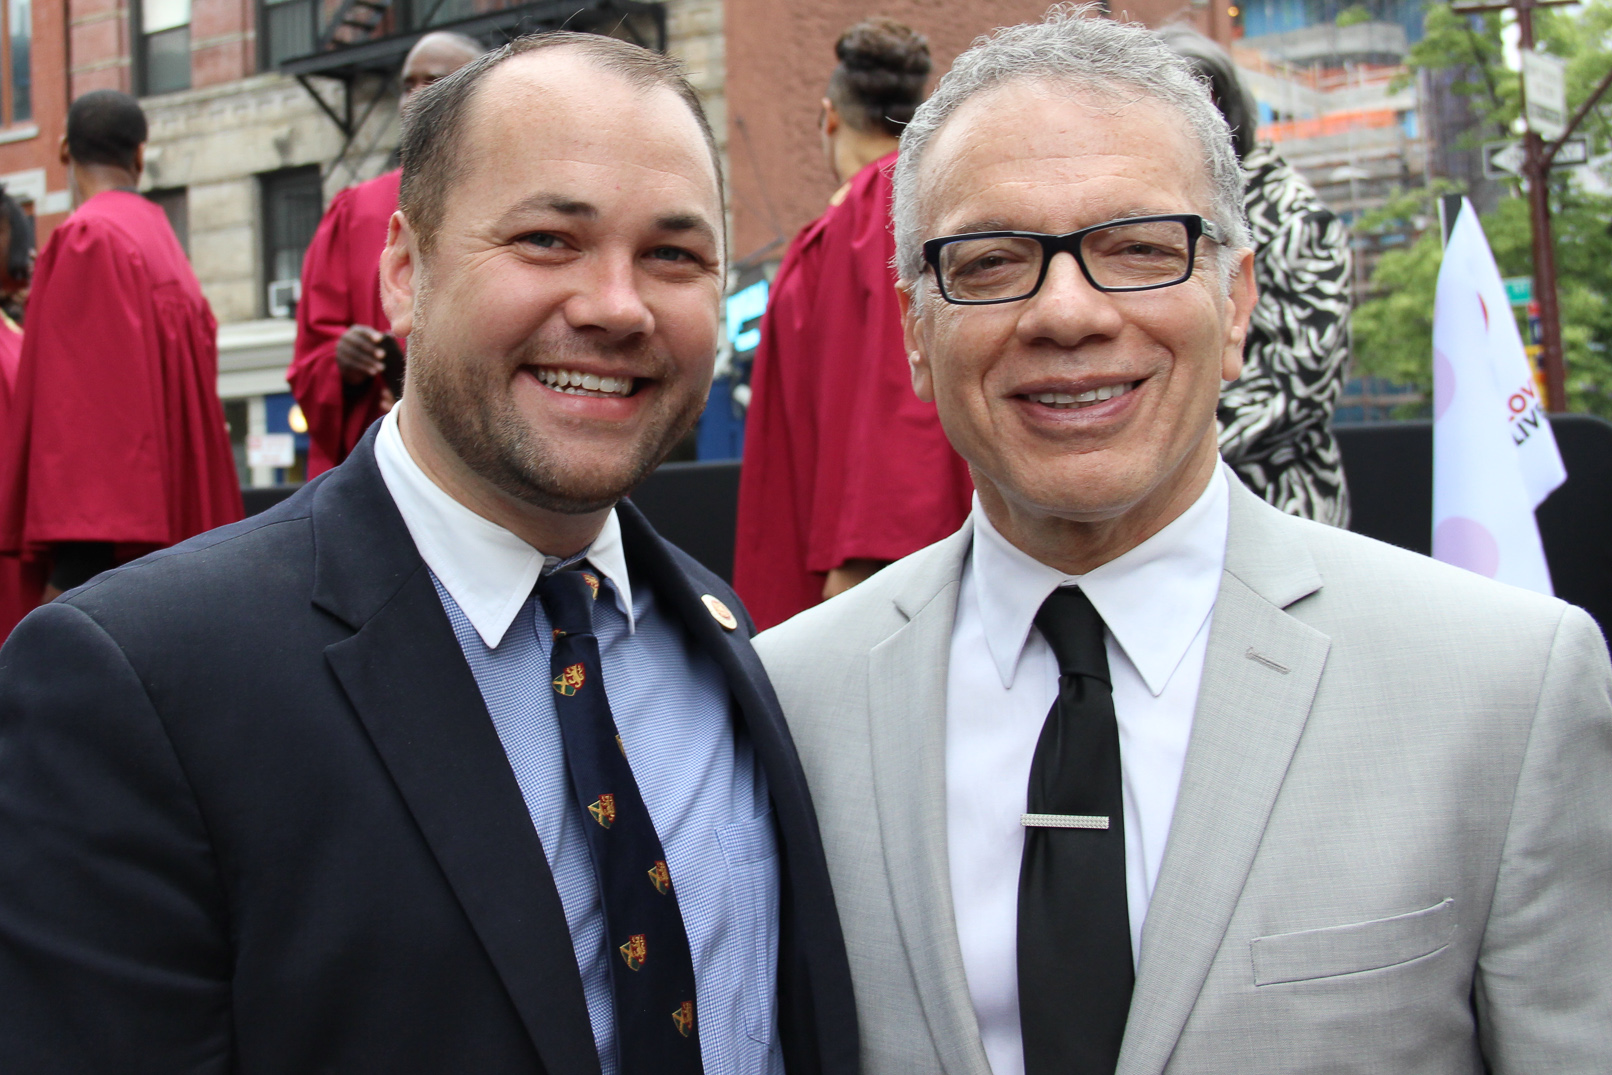 Corey Johnson, left, who today hold’s Duane's old Council seat, with Council colleague James Vacca.